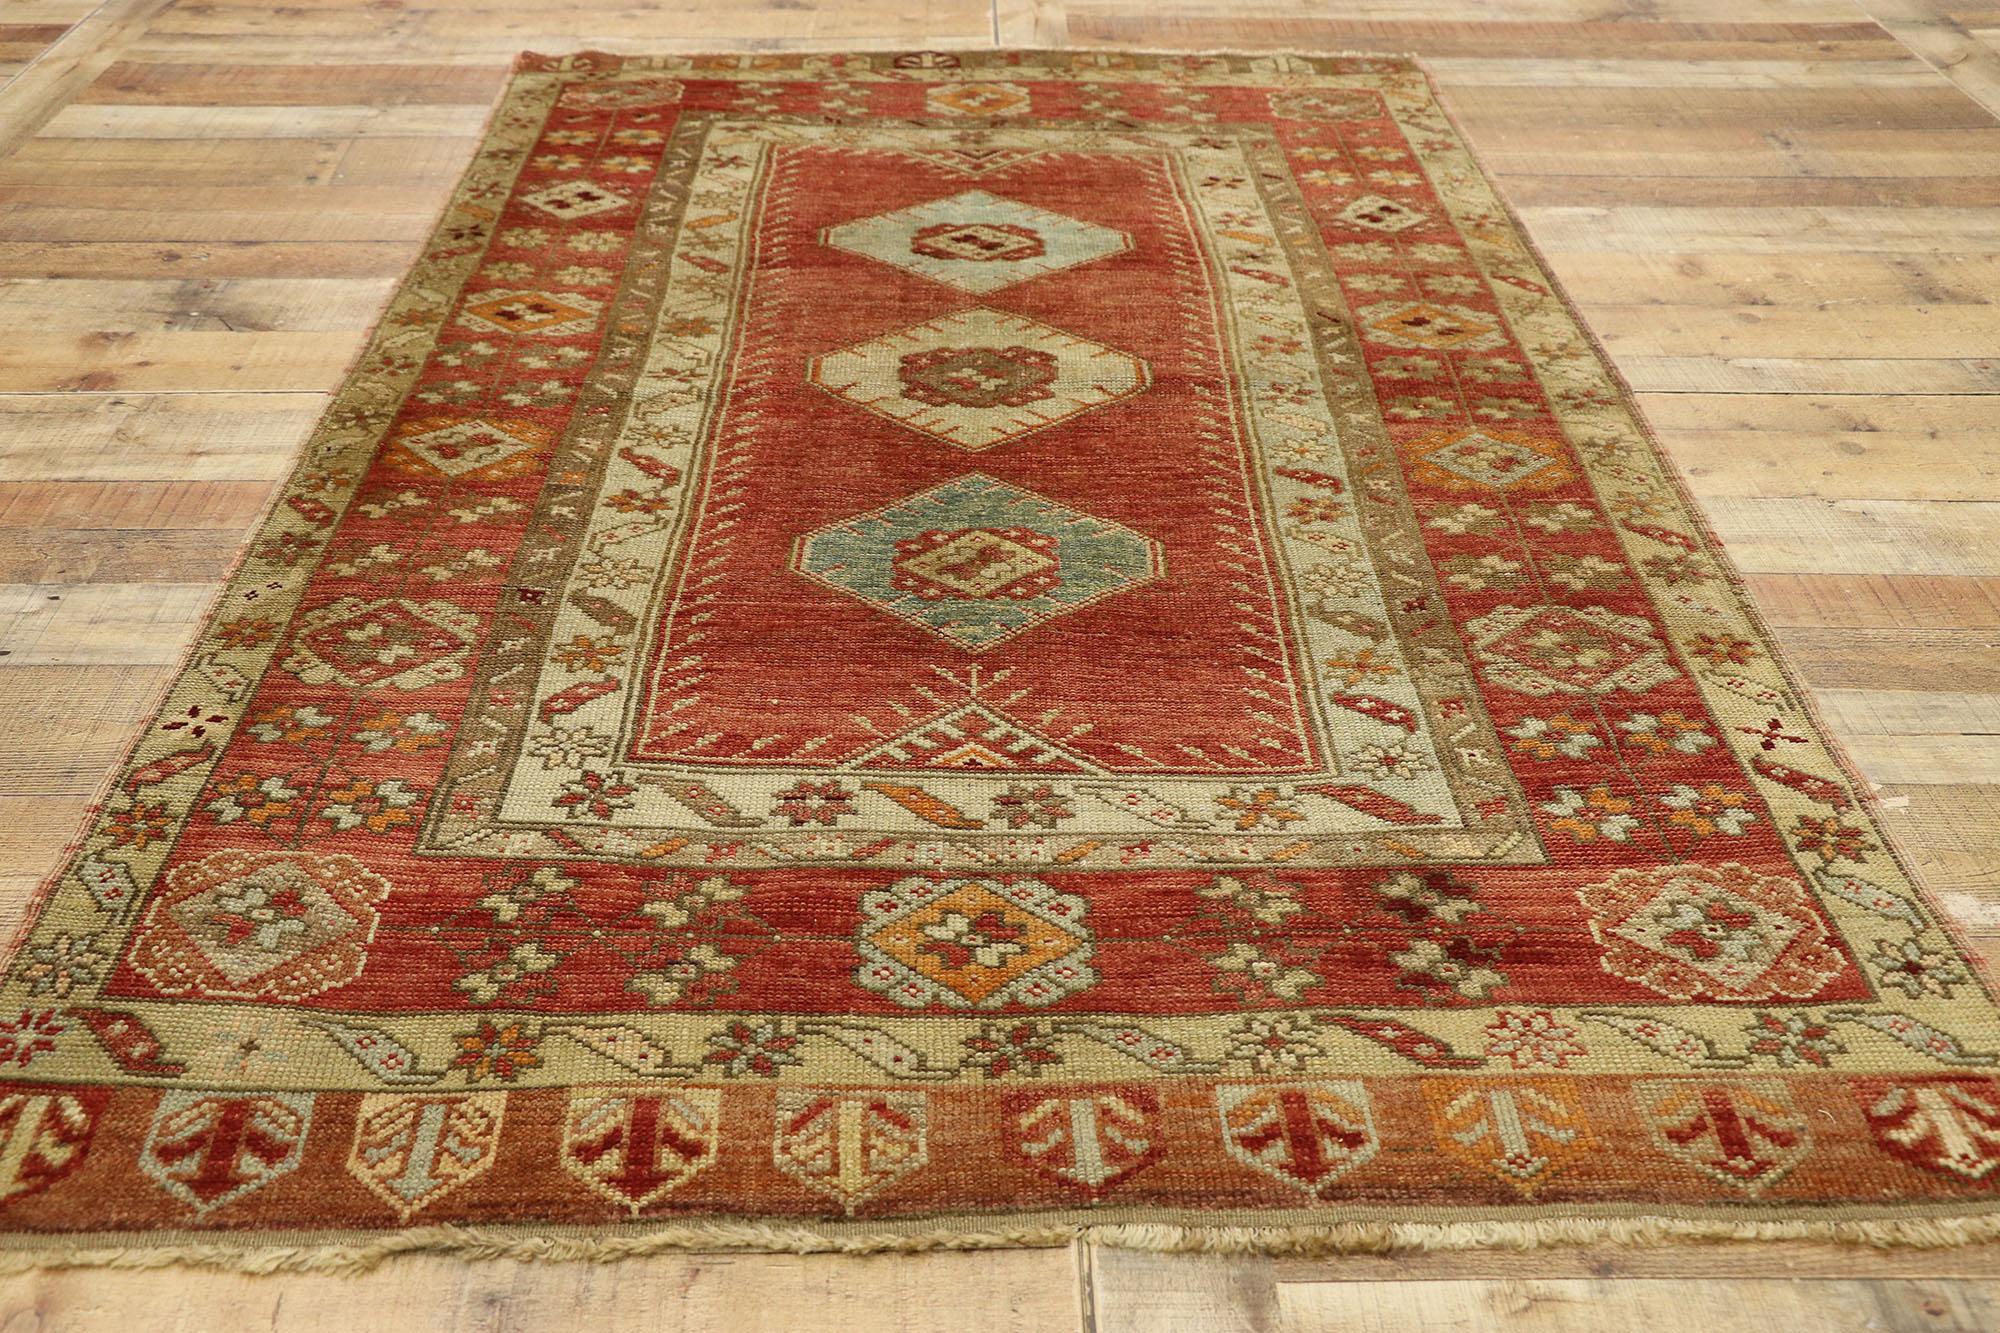 Vintage Turkish Oushak Rug with Rustic Artisan Spanish Colonial Style 1